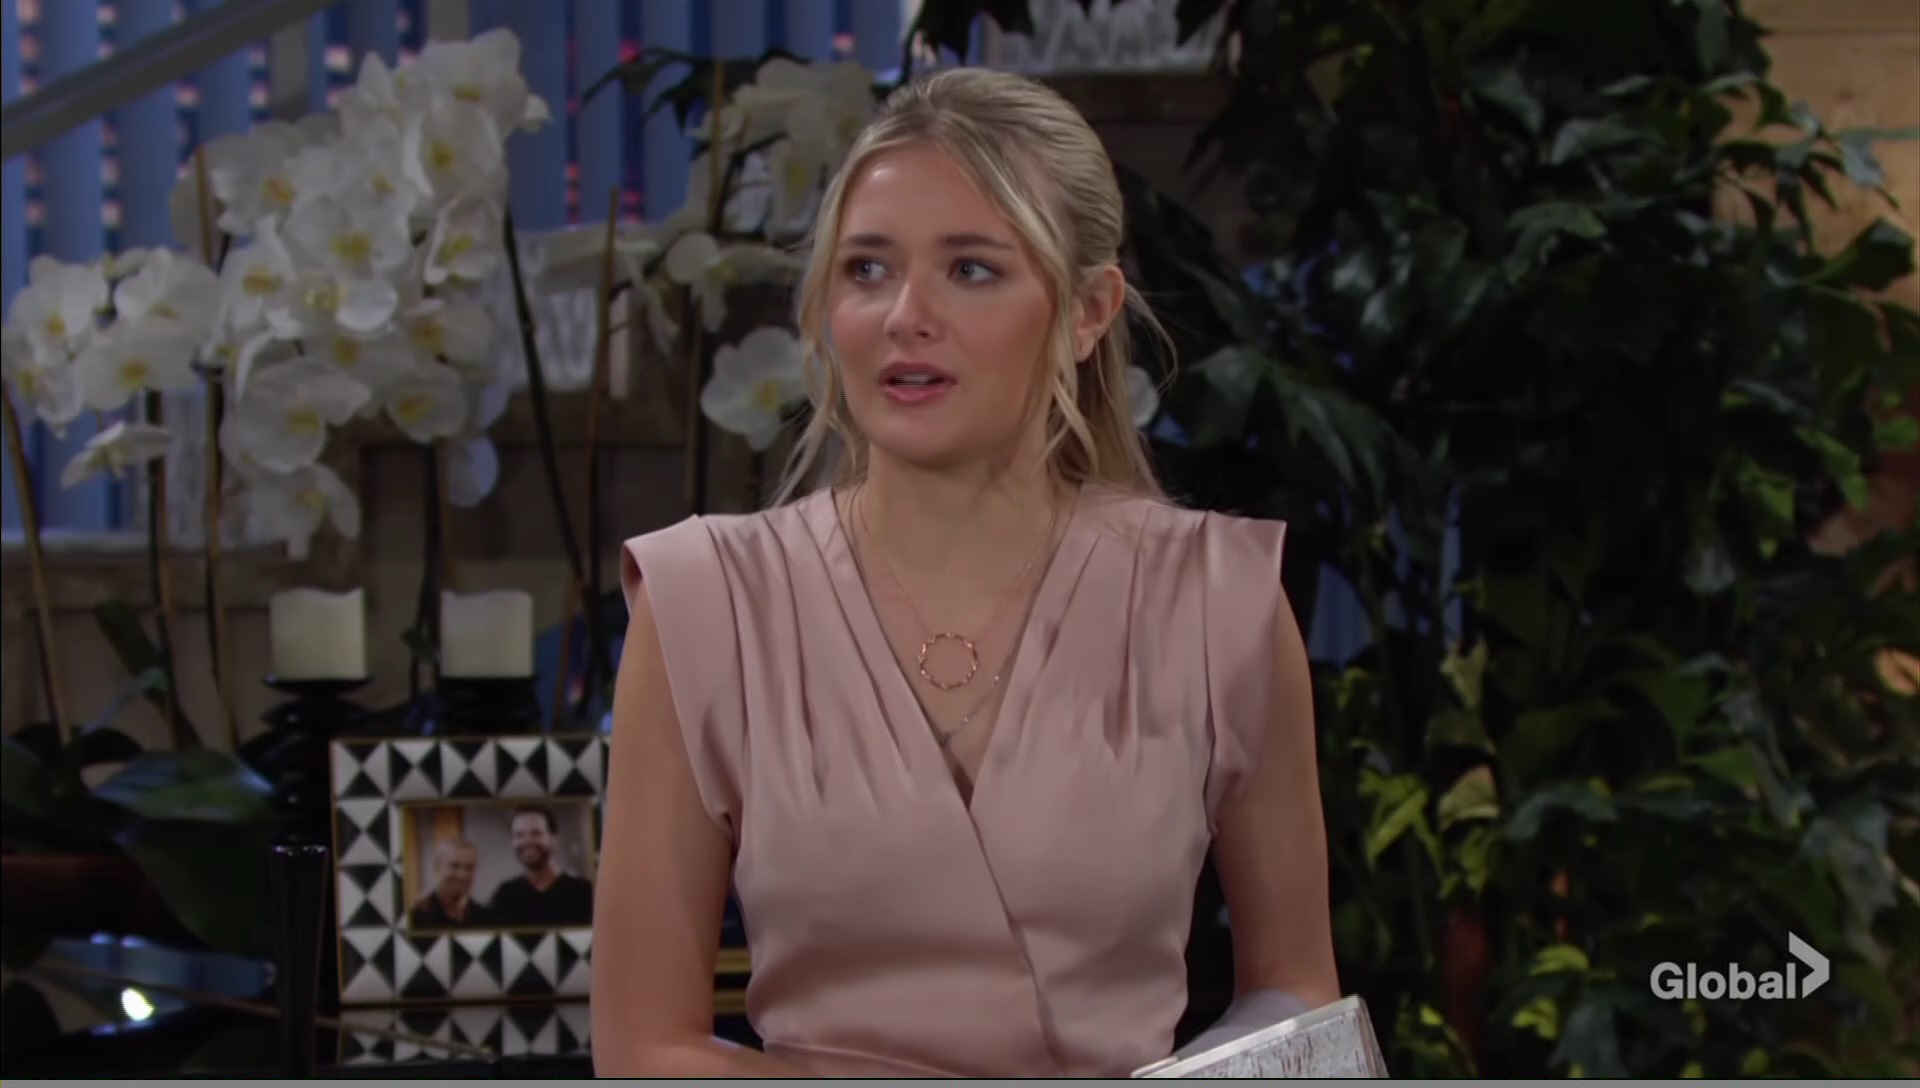 faith pretty date young restless cbs